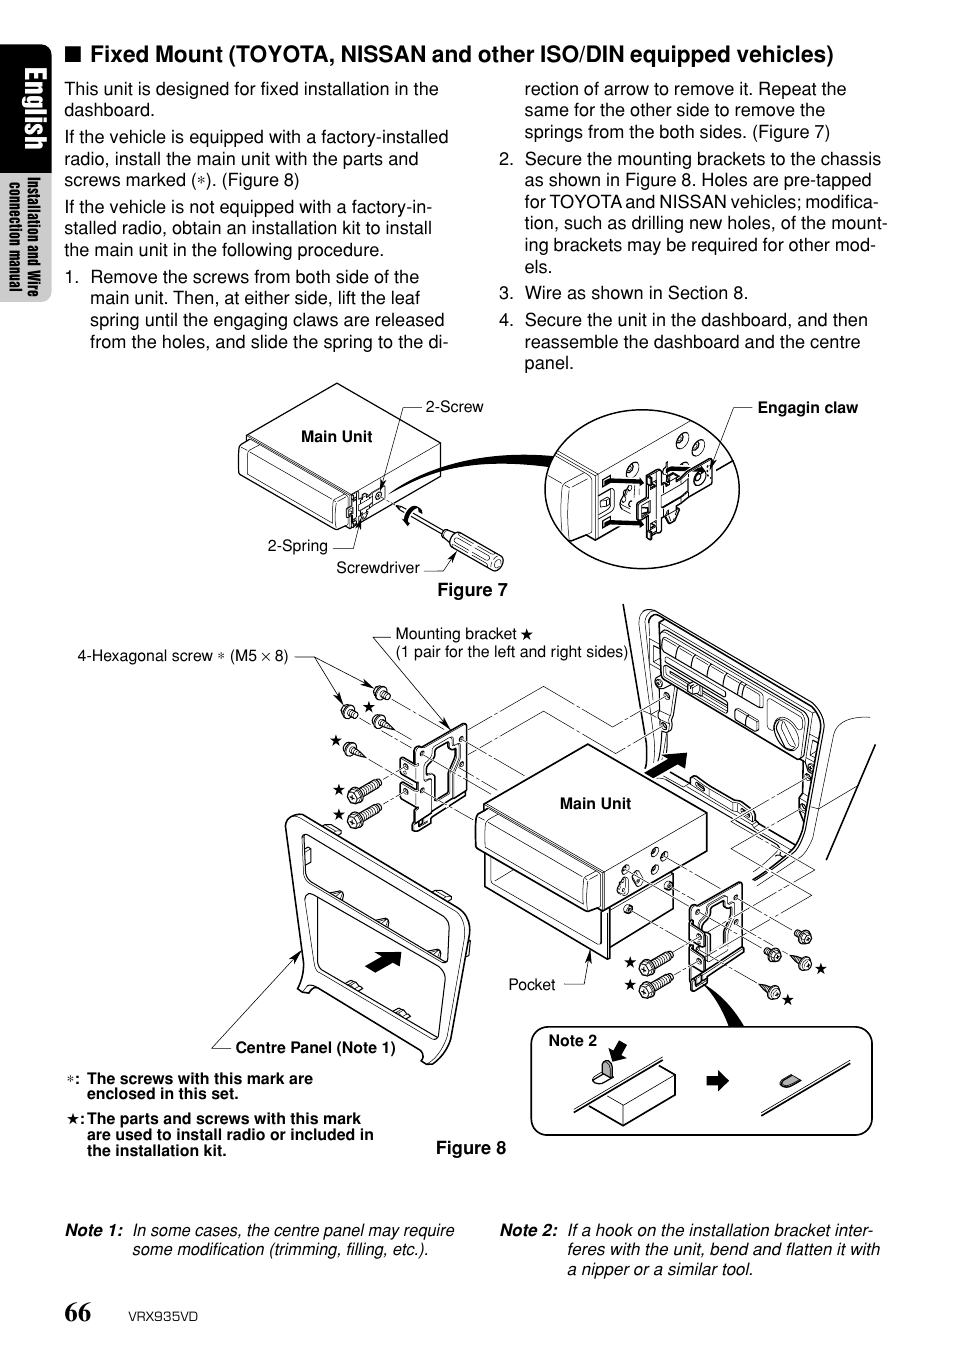 clarion vrx935vd wiring diagram